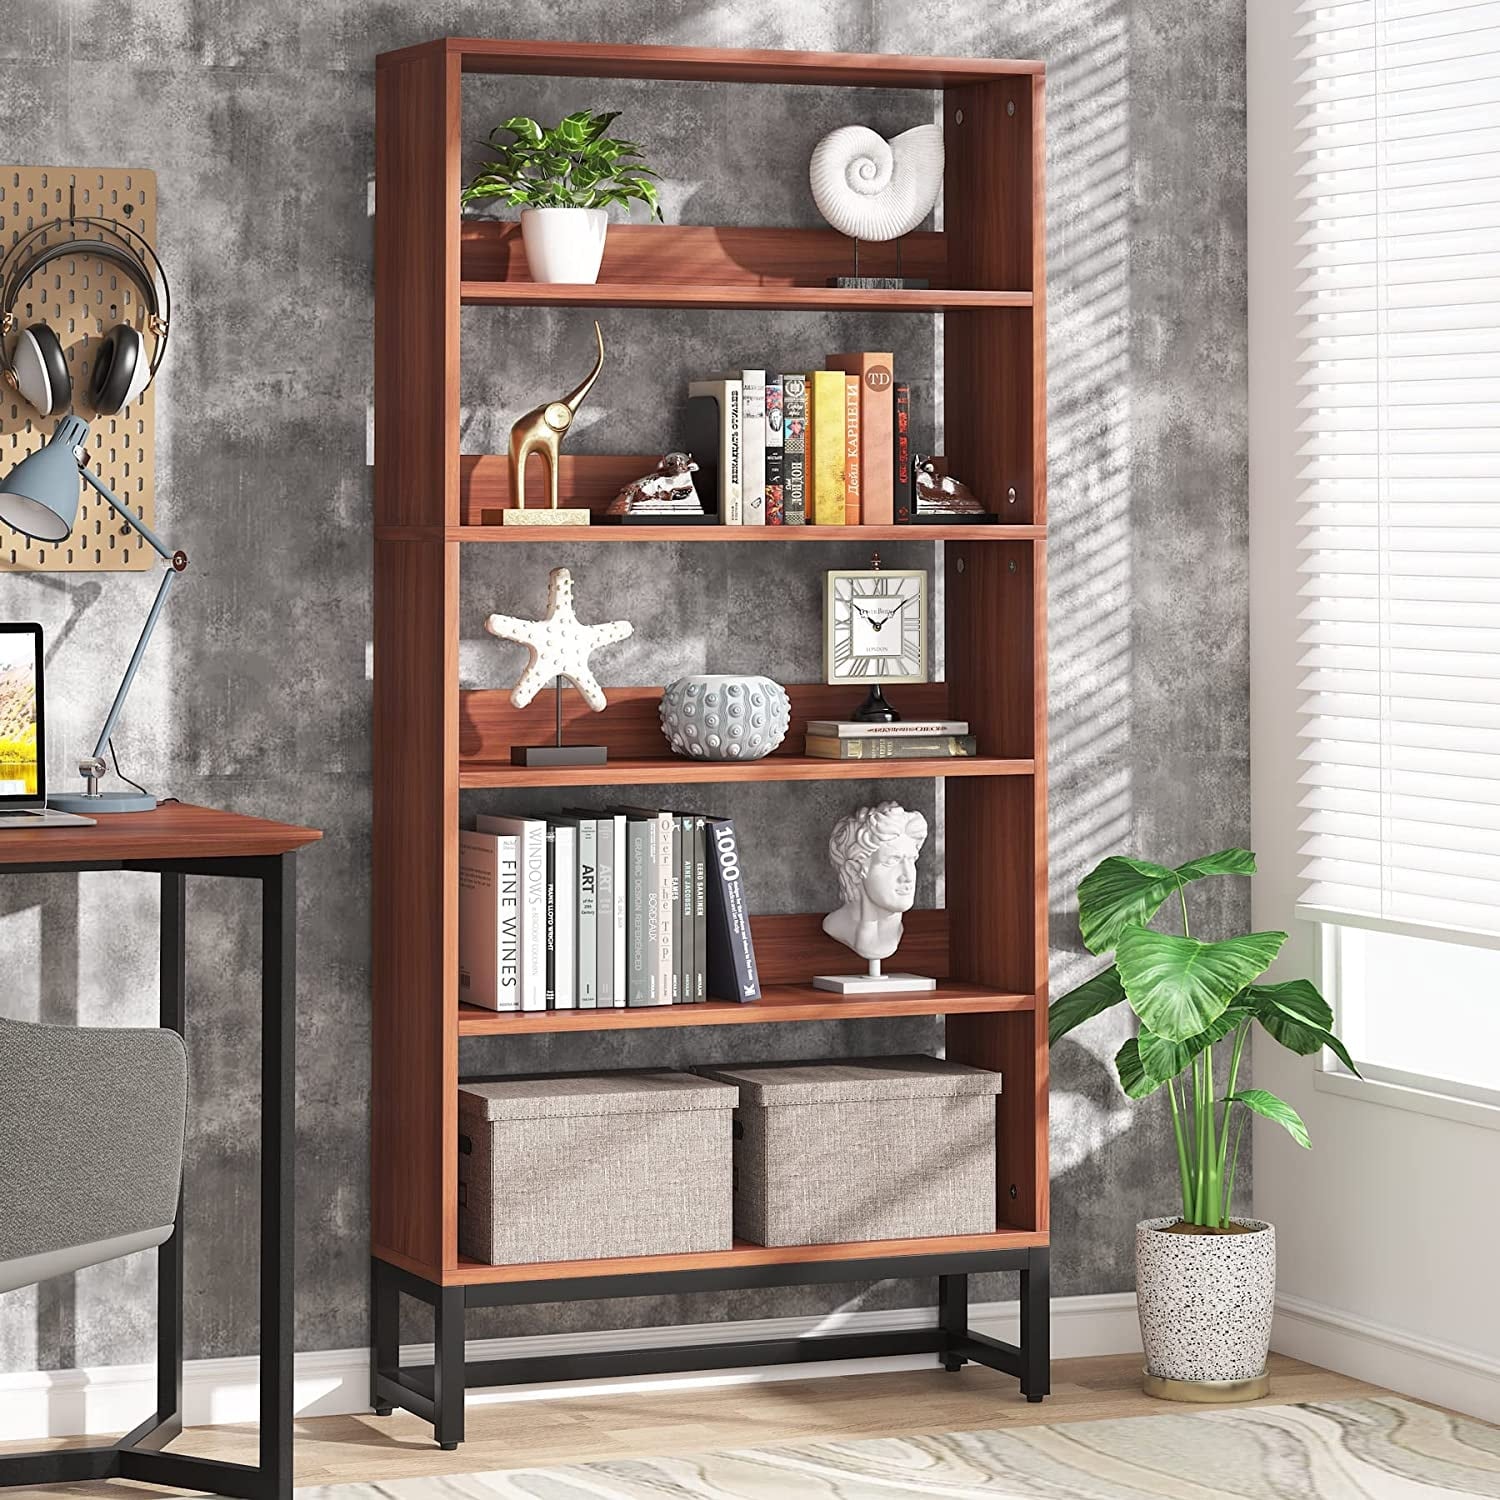 https://ak1.ostkcdn.com/images/products/is/images/direct/5c182f216ef452b70e2ab1ce616c4d53fa818430/5-Shelf-Wood-Bookcase-Freestanding-Display-Bookshelf-for-Home-Office.jpg